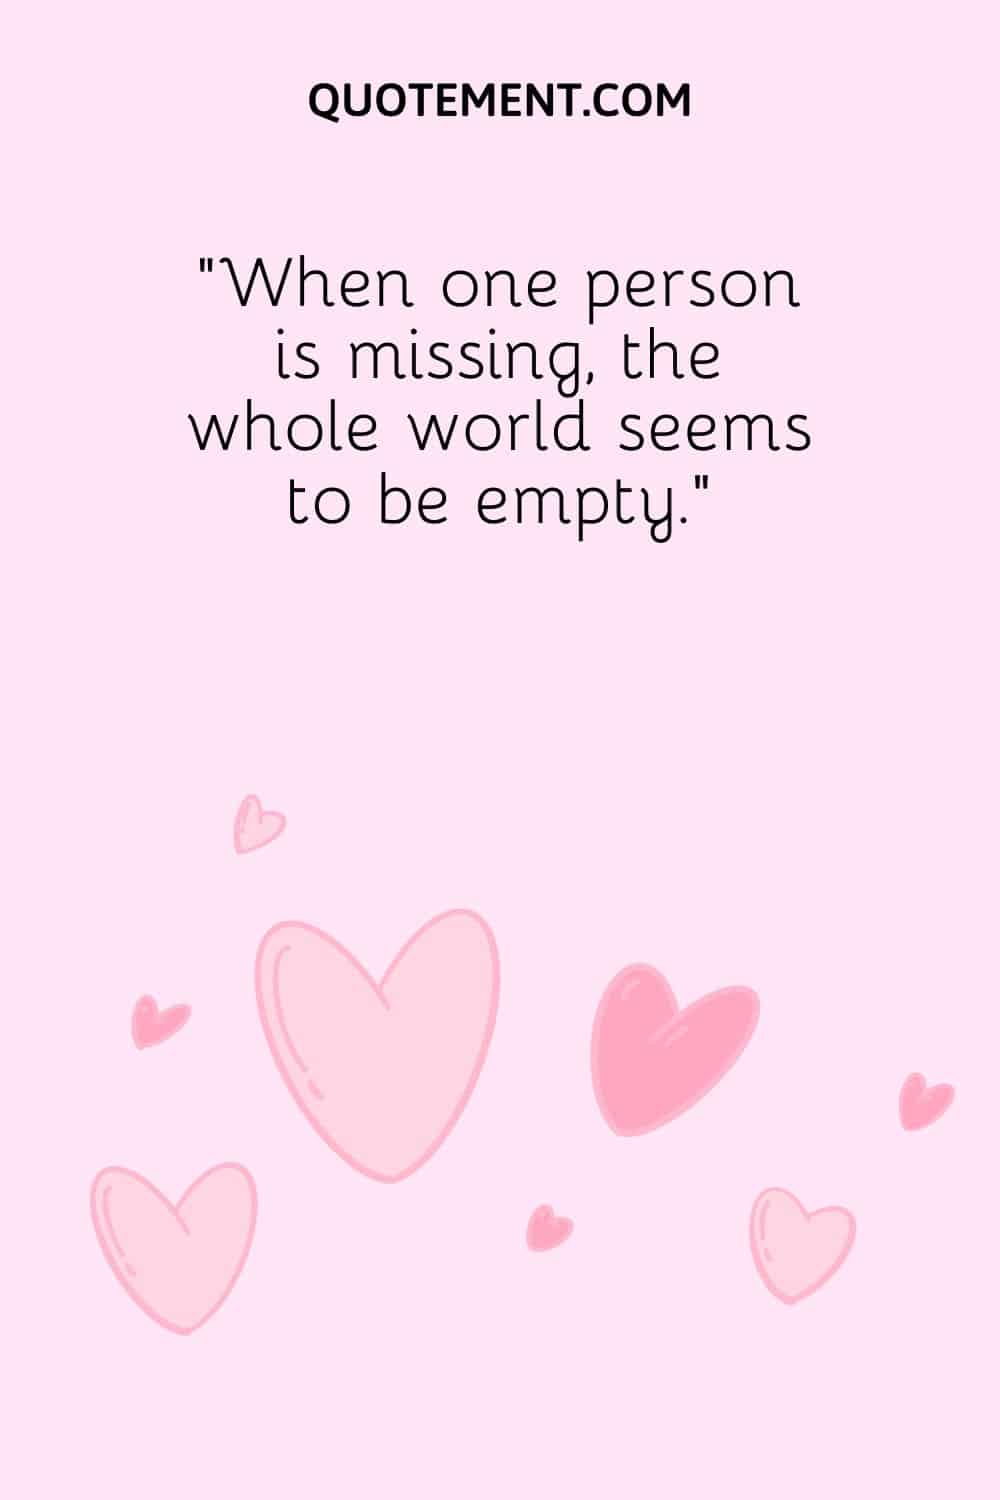 “When one person is missing, the whole world seems to be empty.”